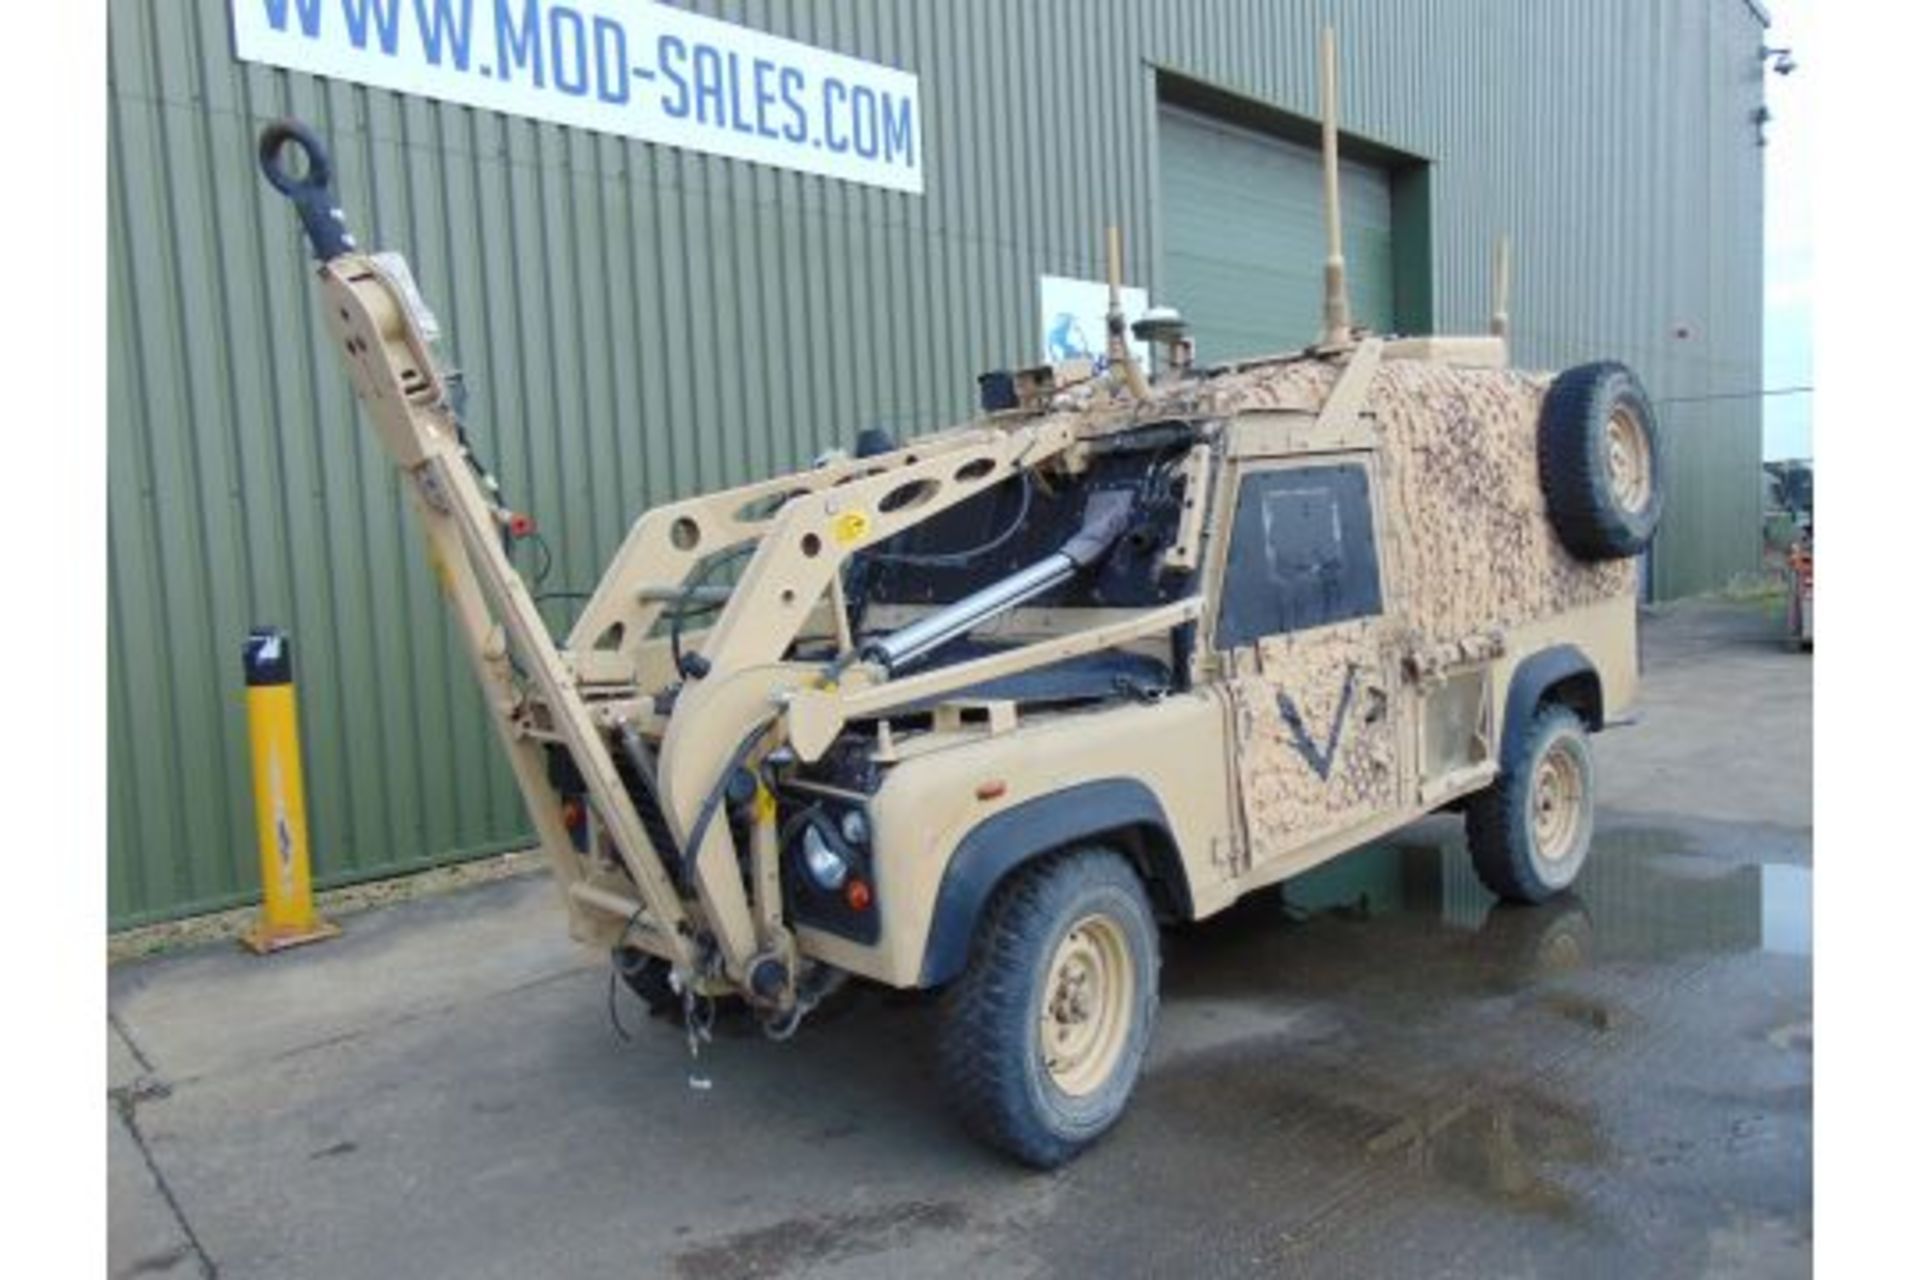 Very Rare Remote Controlled Land Rover 110 300TDi Panama Snatch-2A (HT) W/VPK 24V - ONLY 286 HOURS